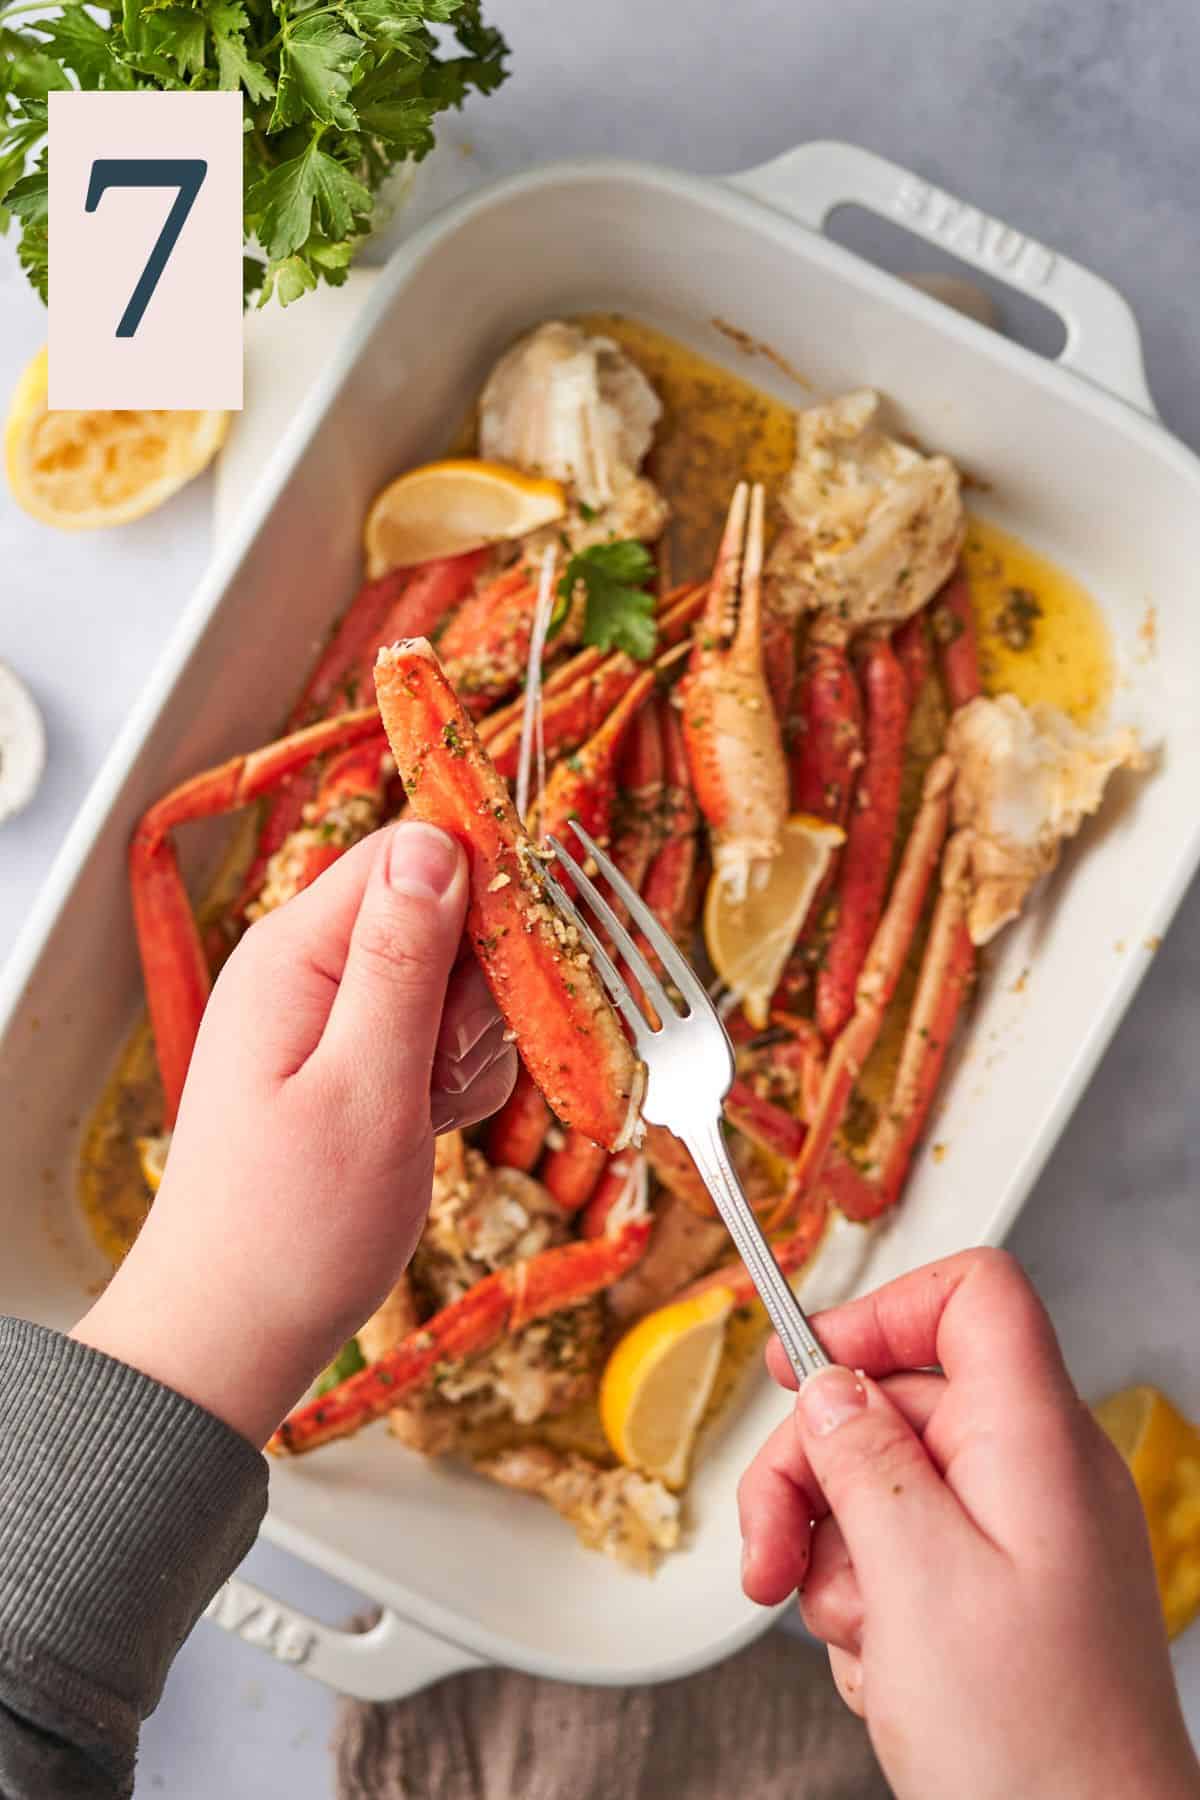 Inserting a fork inside a crab leg to remove the meat.